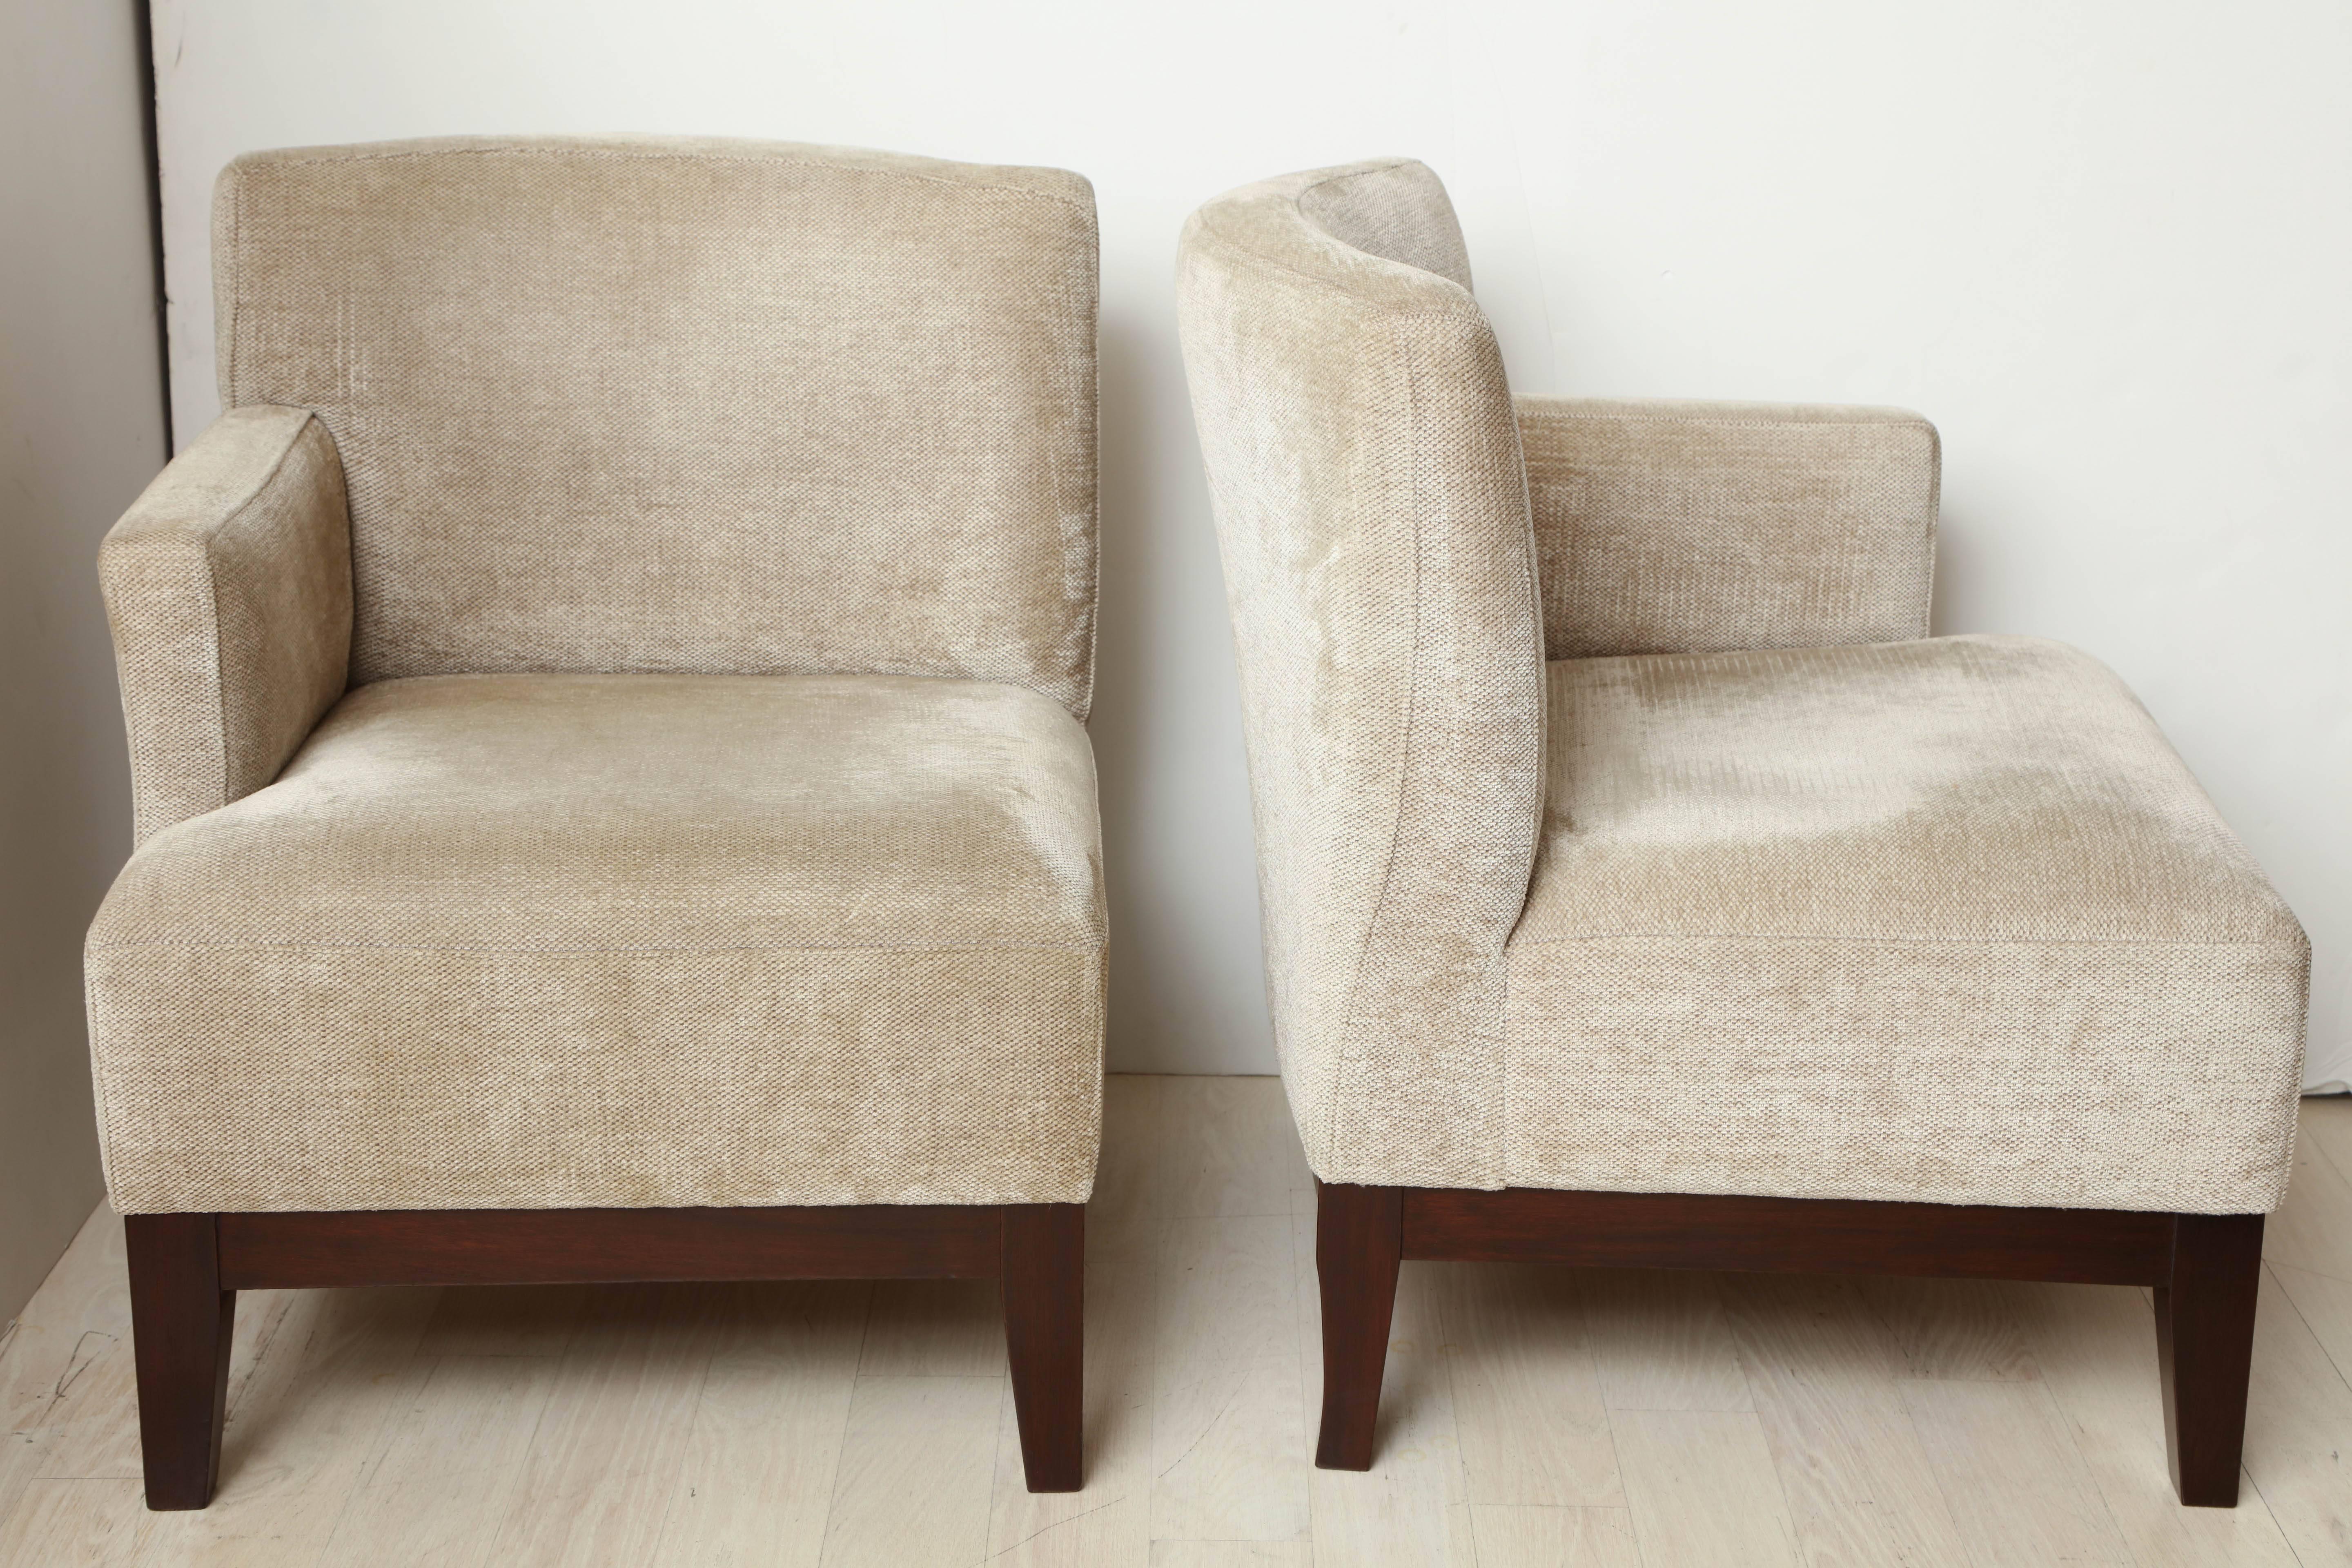 Pair of Modern Single Arm Wood and Upholstered Beige Chenille Chairs, Belgium For Sale 1